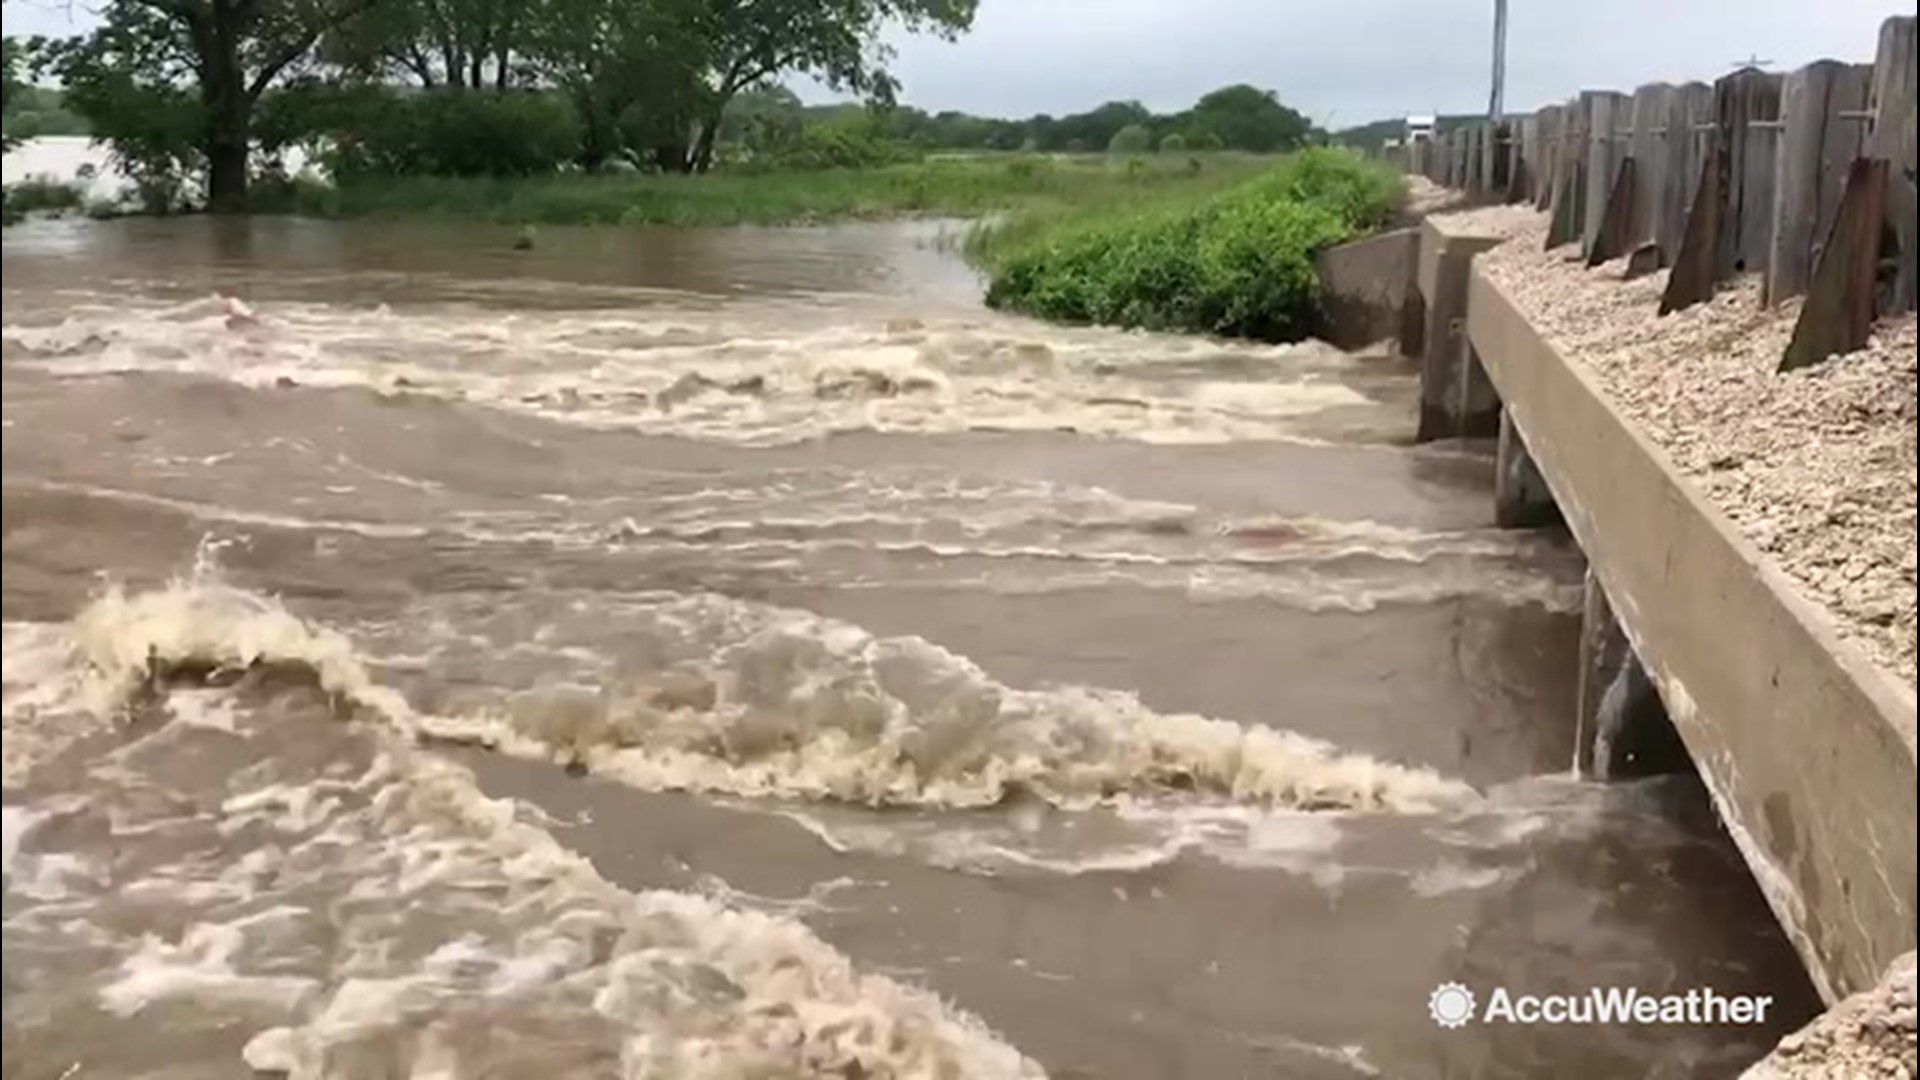 This creek along Highway 166 near Coffeyville, Kansas has turned into a raging river amid flash flood threats on May 22.